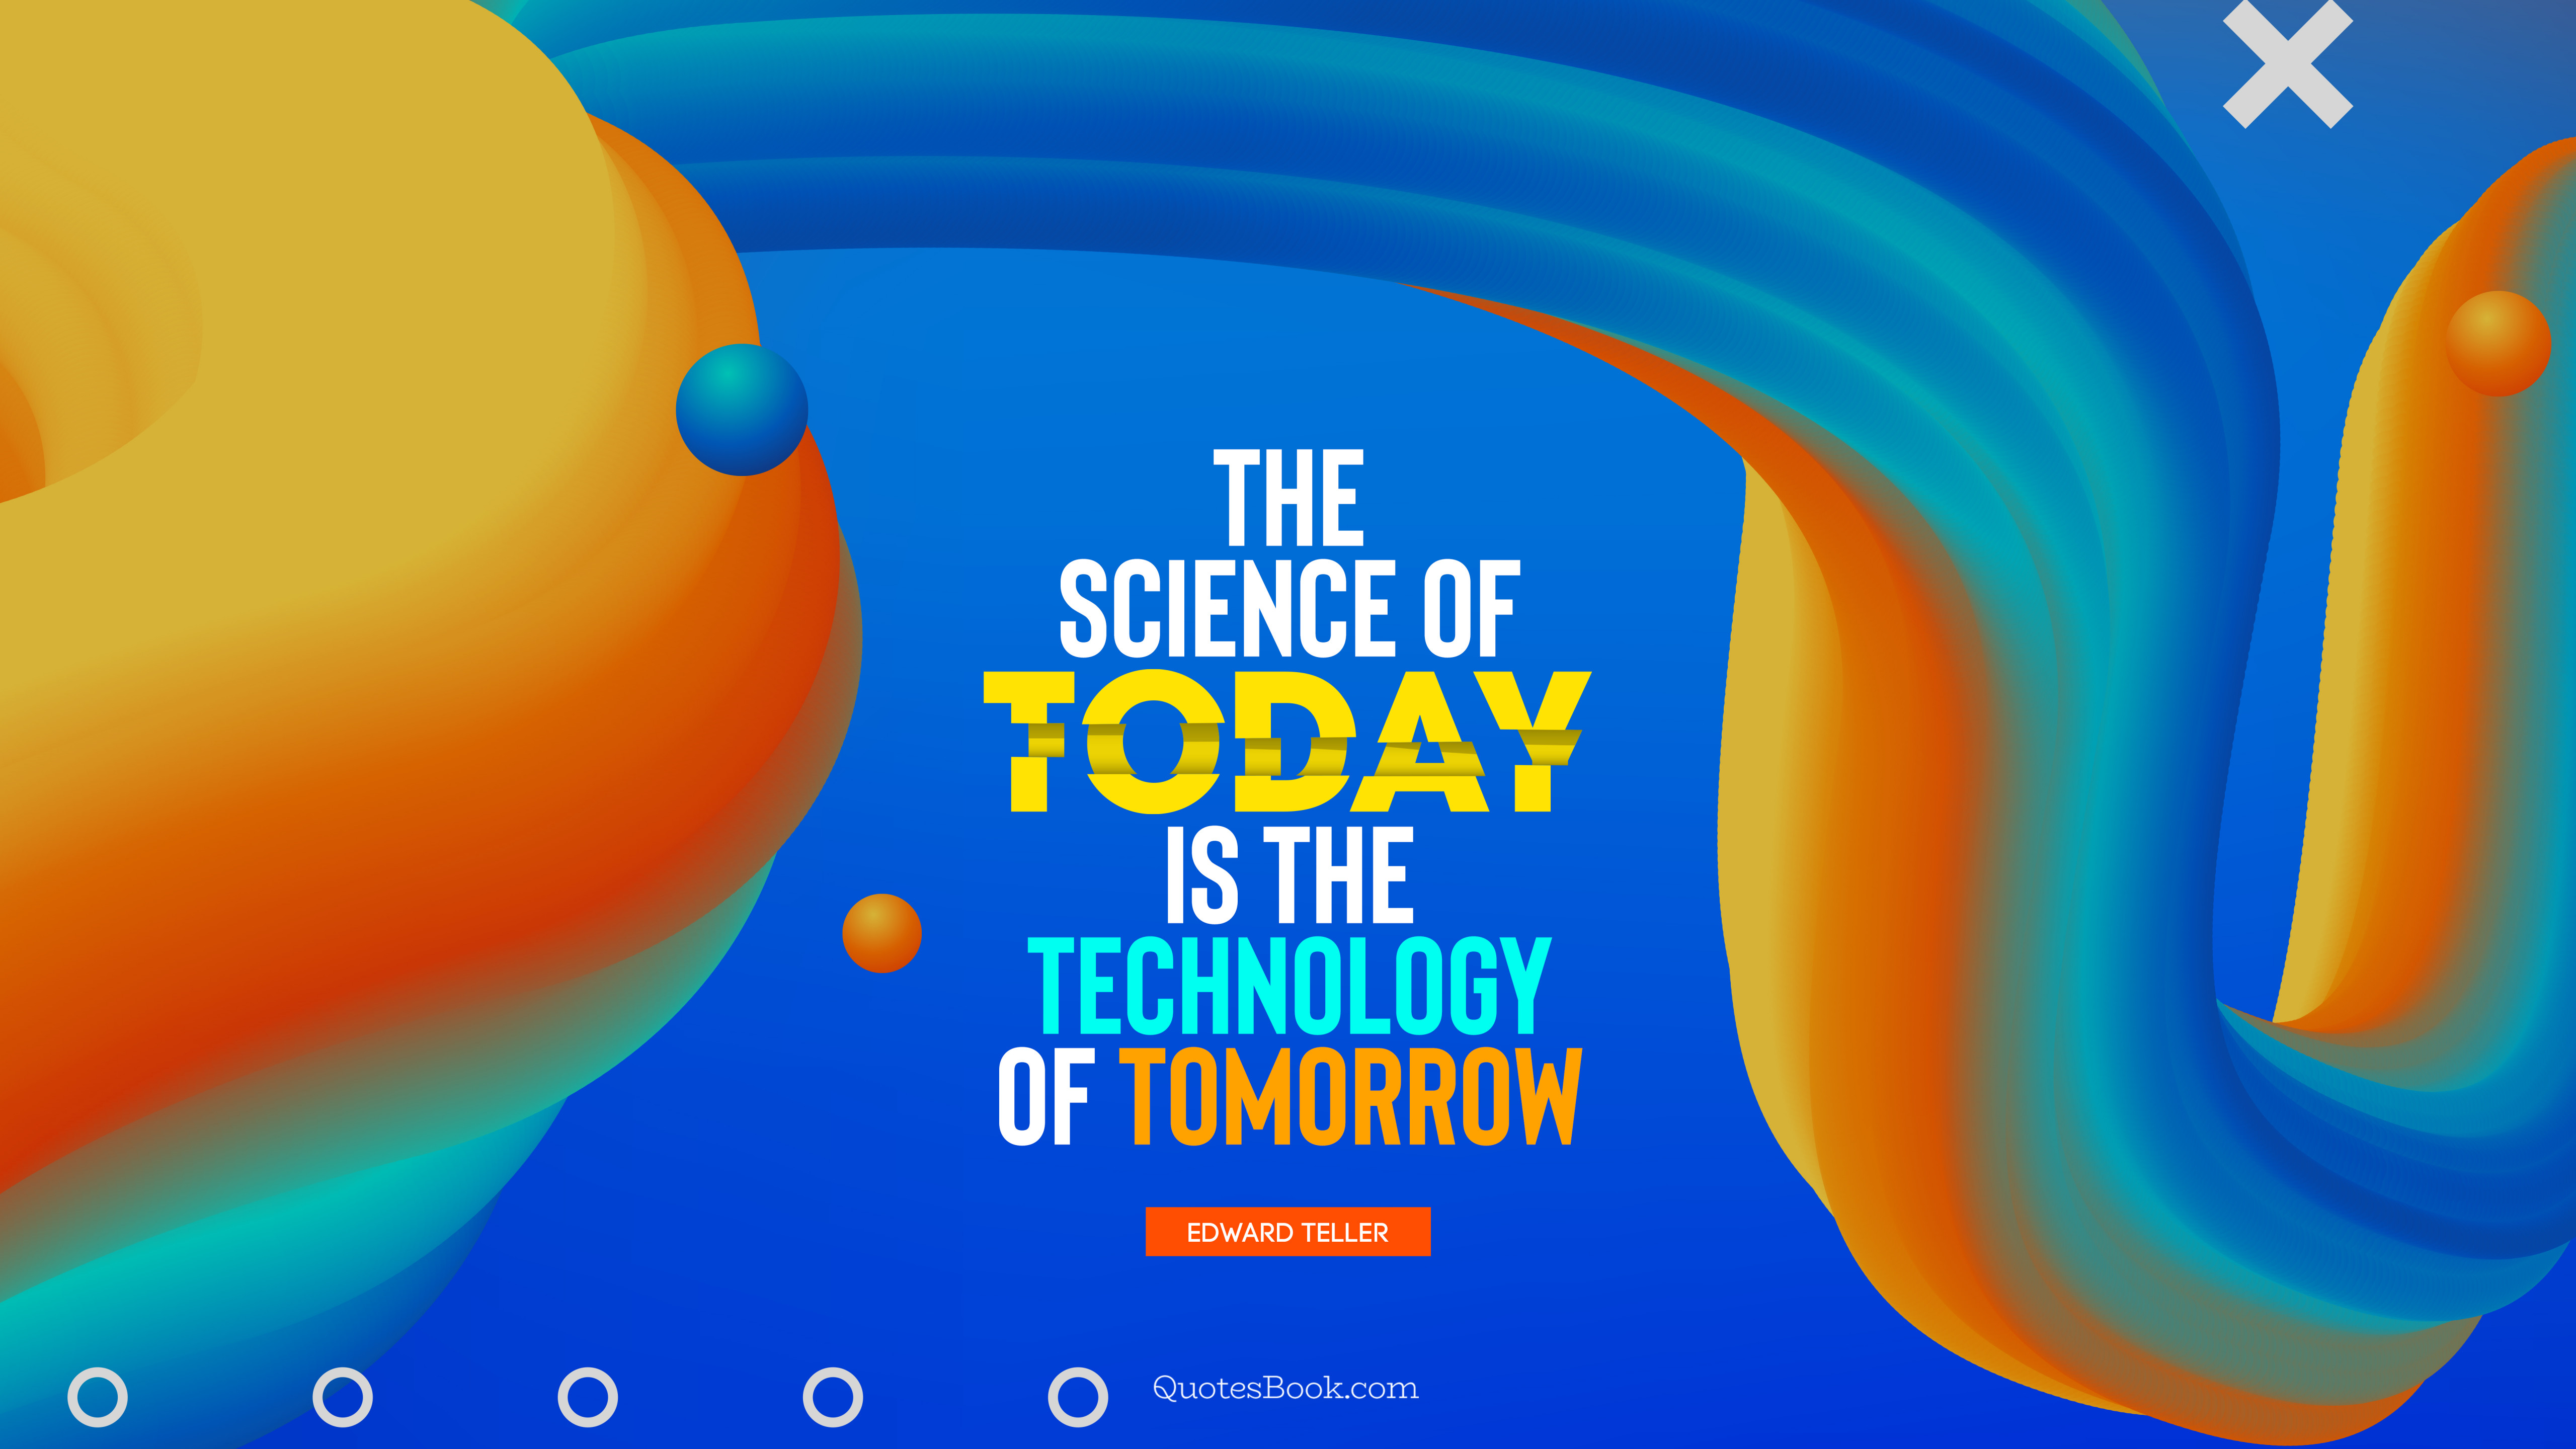 The science of today is the technology of tomorrow. - Quote by Edward